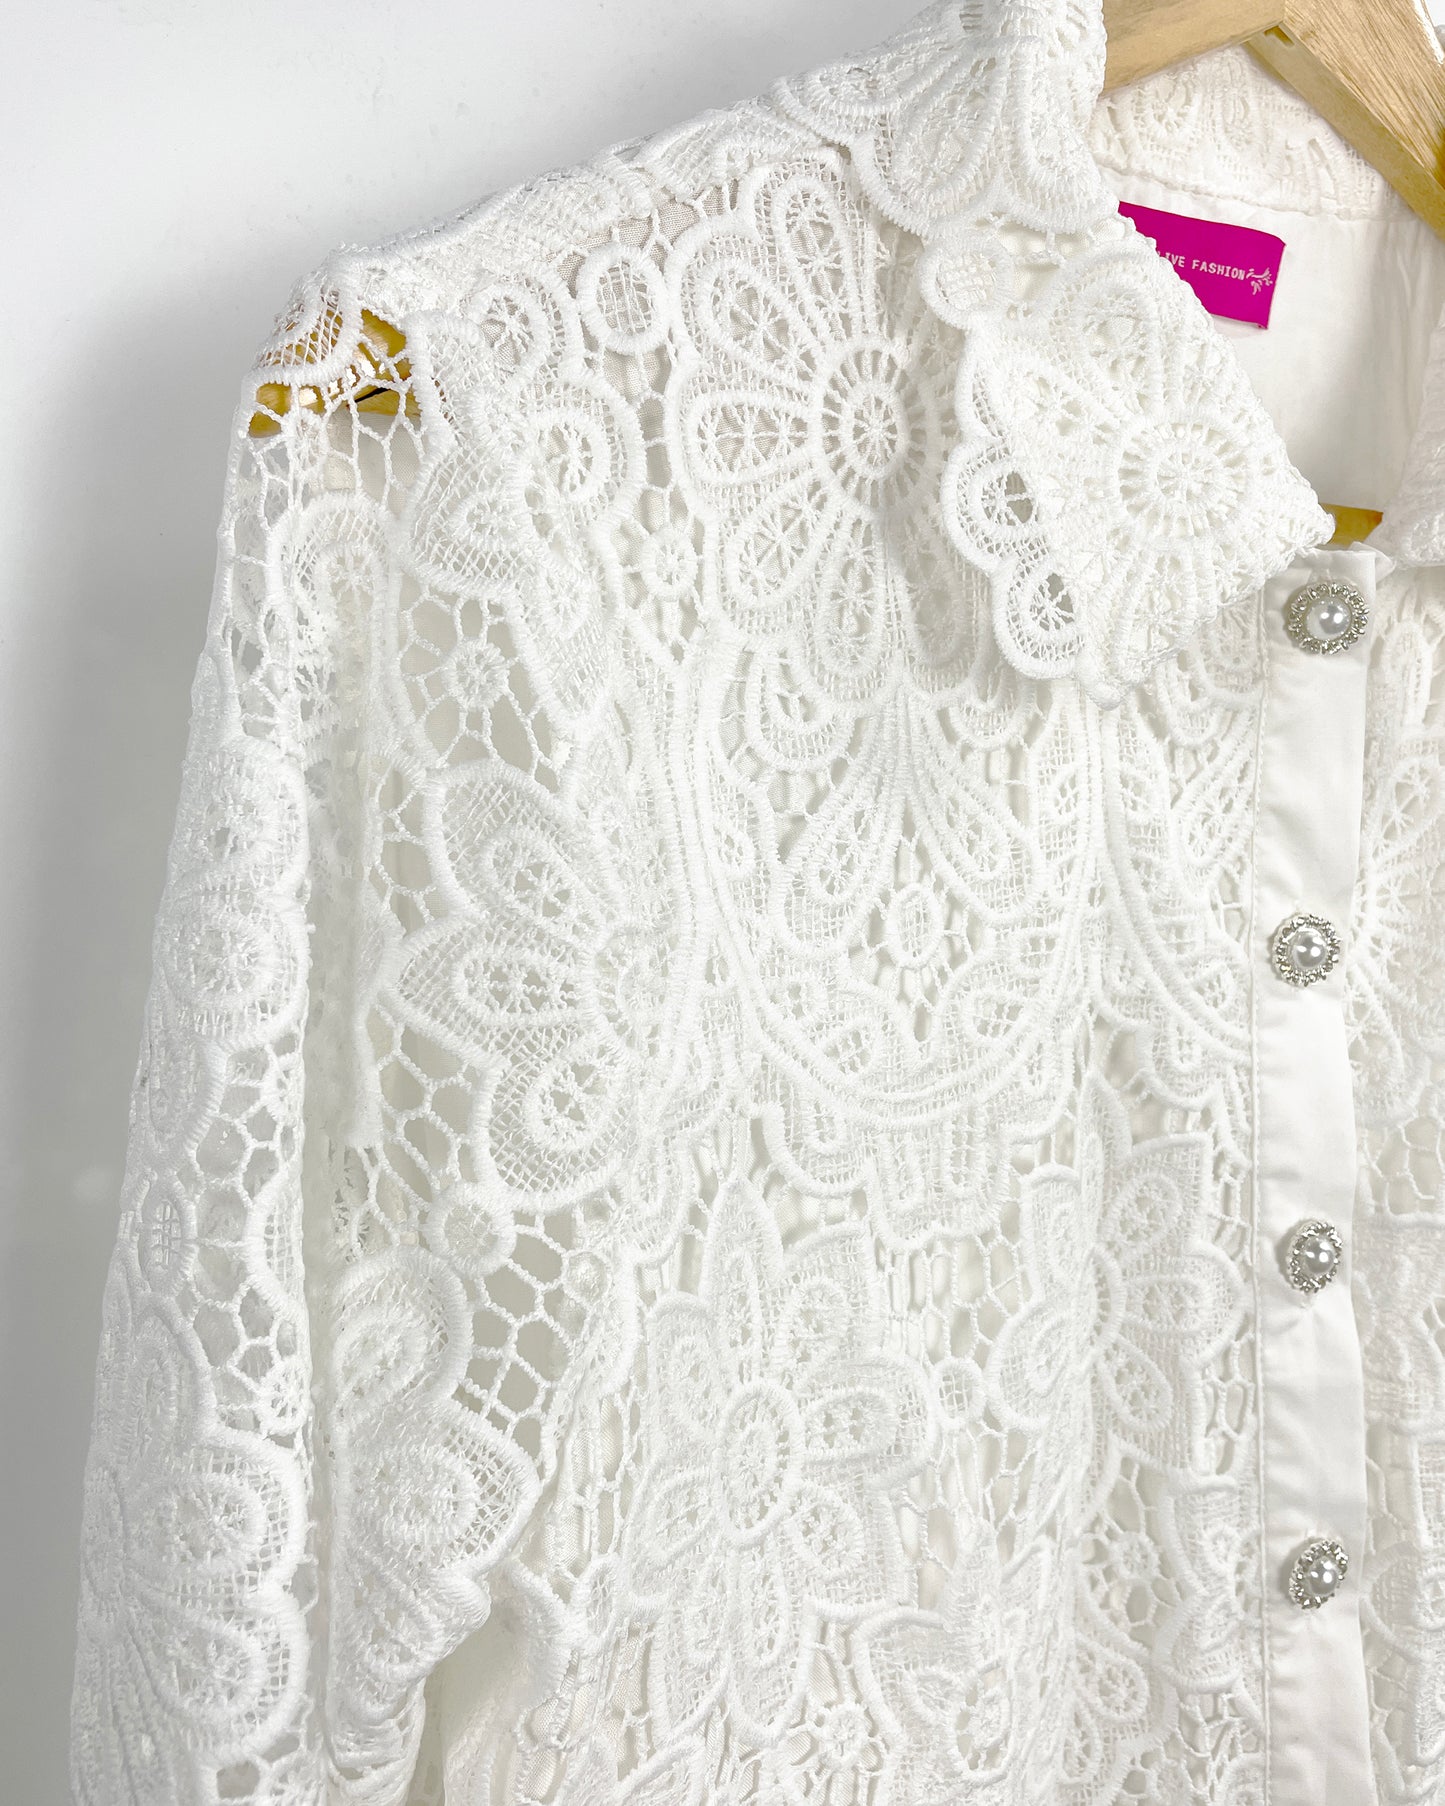 Lace shirt with long sleeve